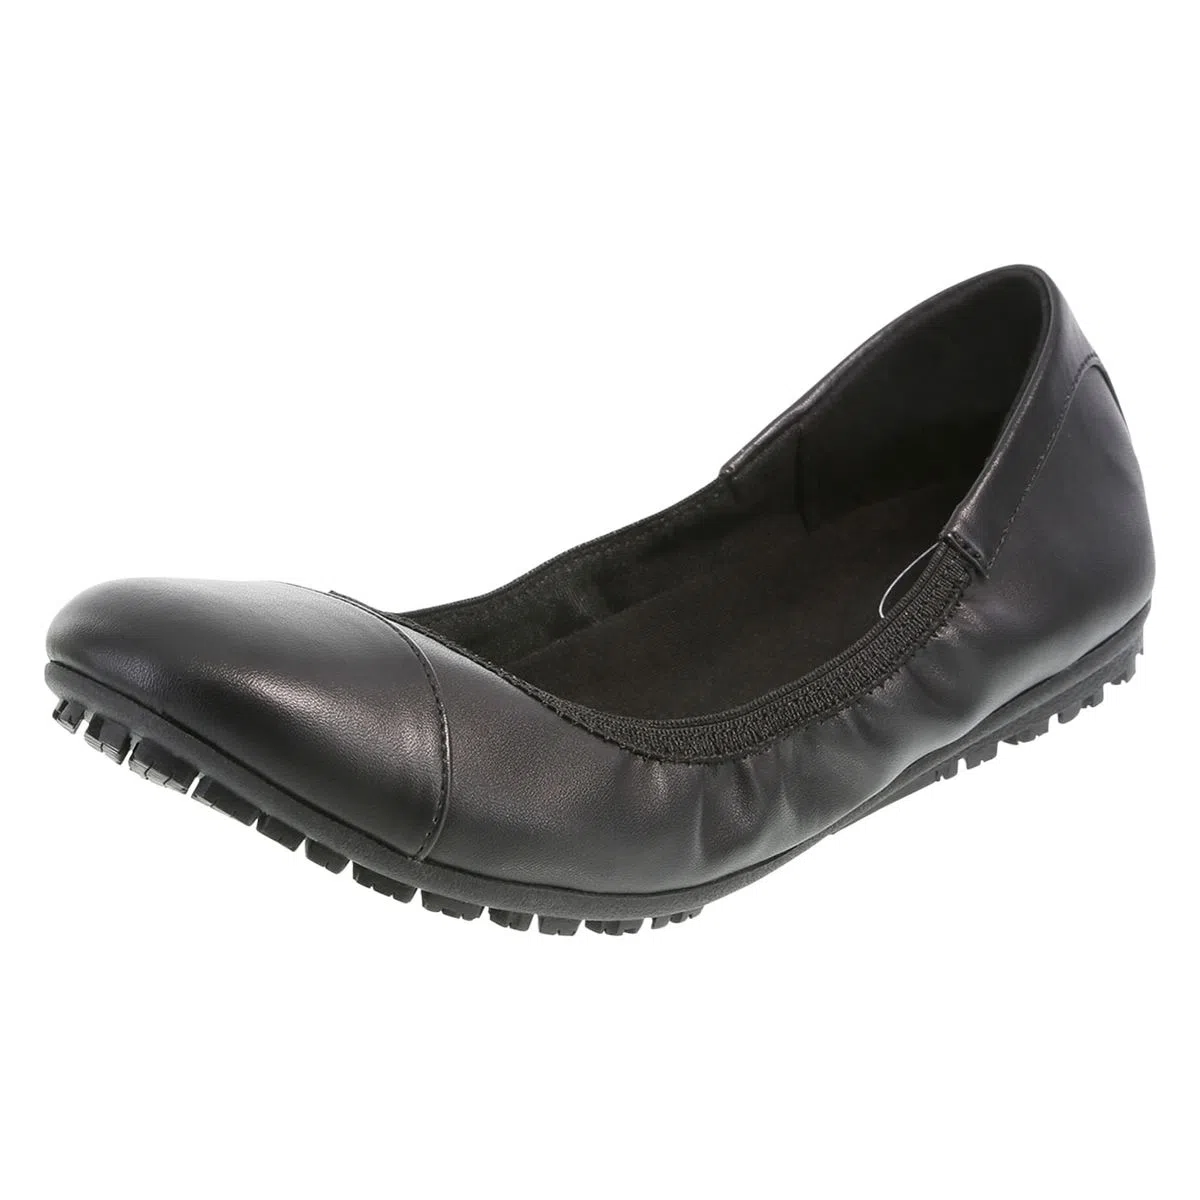 Safety First: Women’s Shoes for Work - Payless Shoes Blog